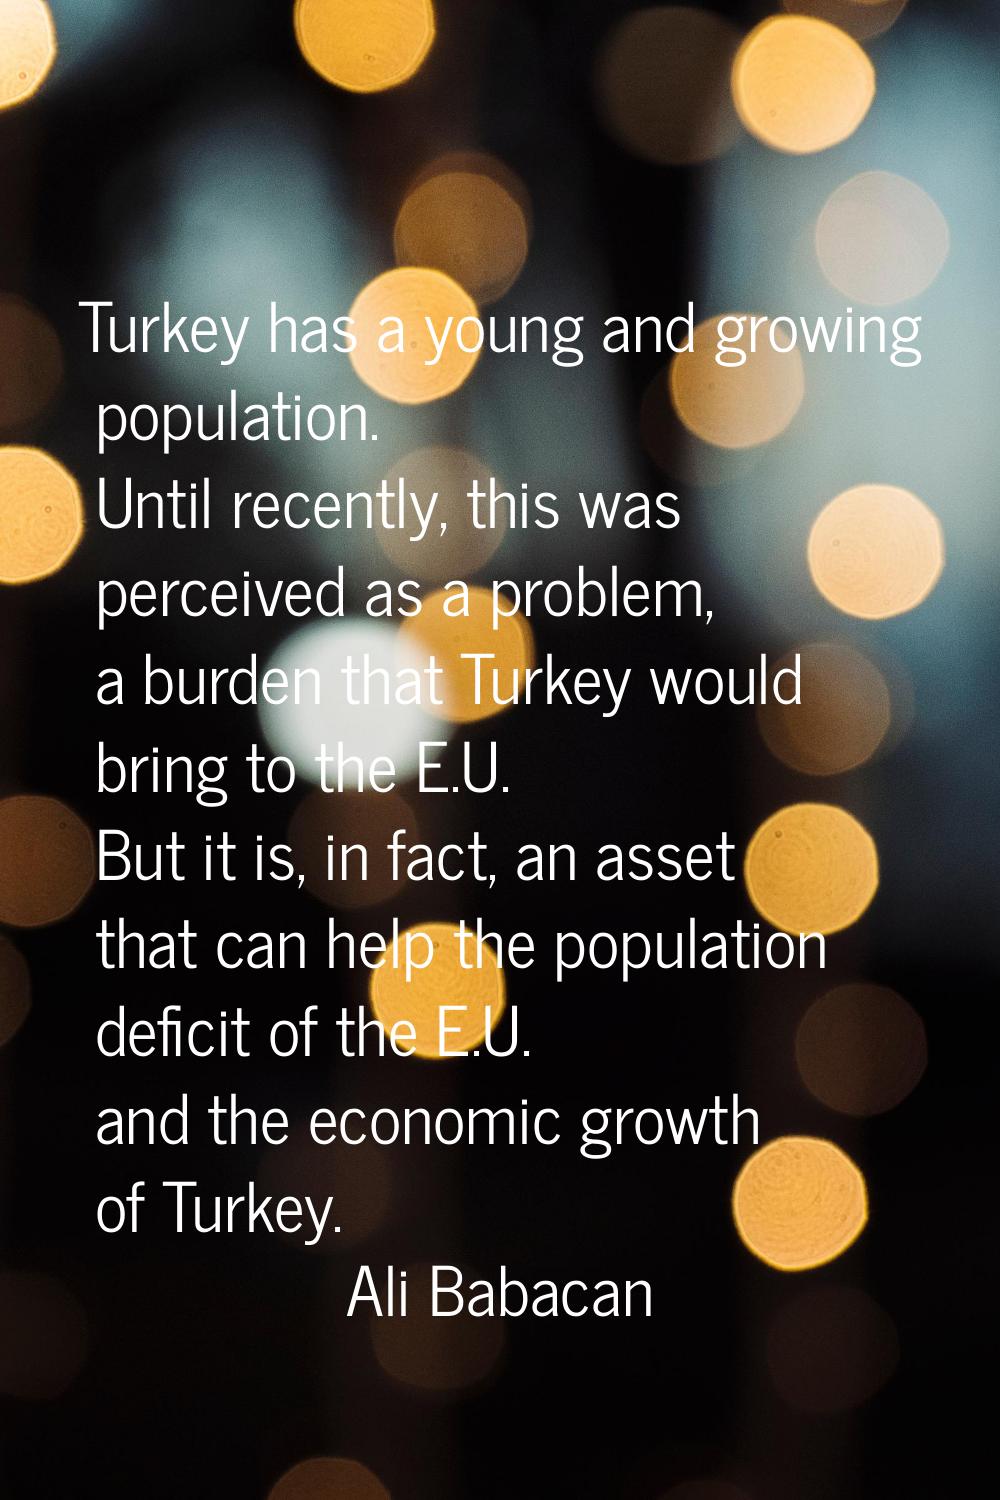 Turkey has a young and growing population. Until recently, this was perceived as a problem, a burde